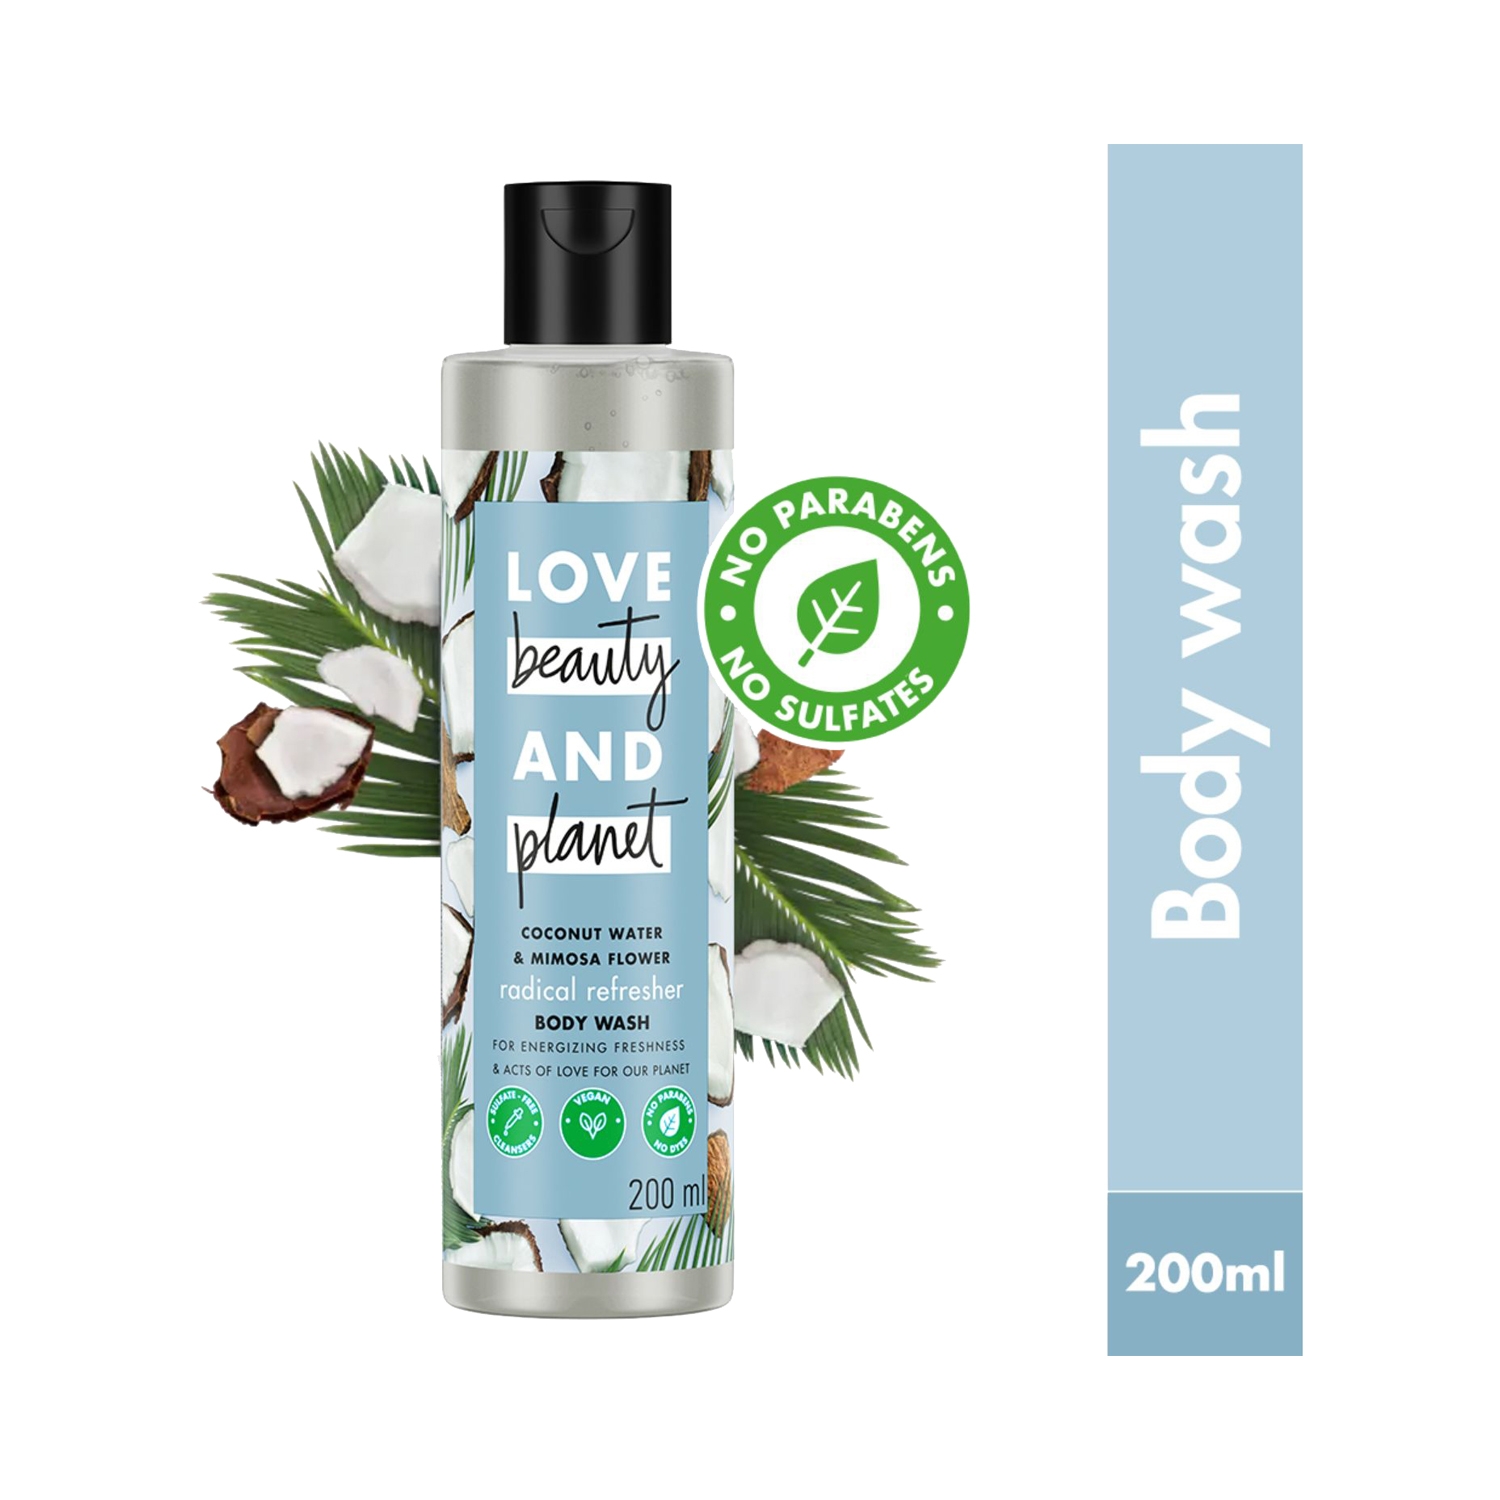 Love Beauty & Planet | Love Beauty & Planet Natural Coconut Water and Mimosa Body Wash (200ml)